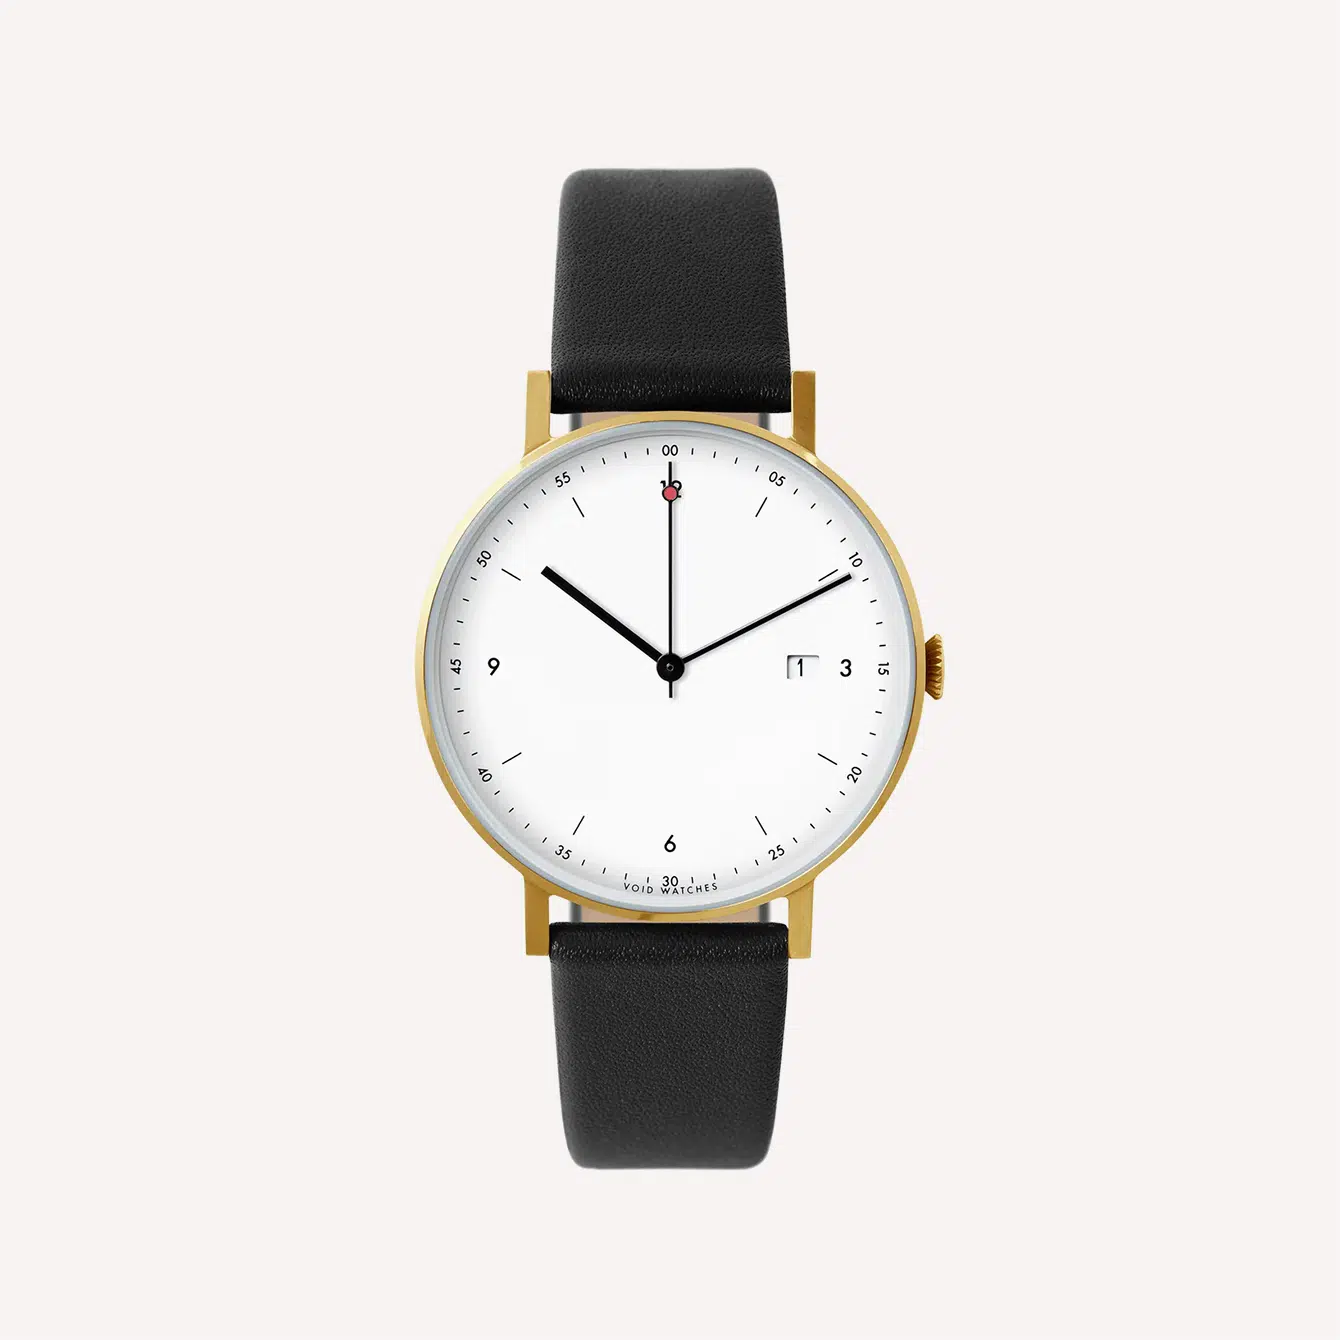 The PKG01 by Void Watches